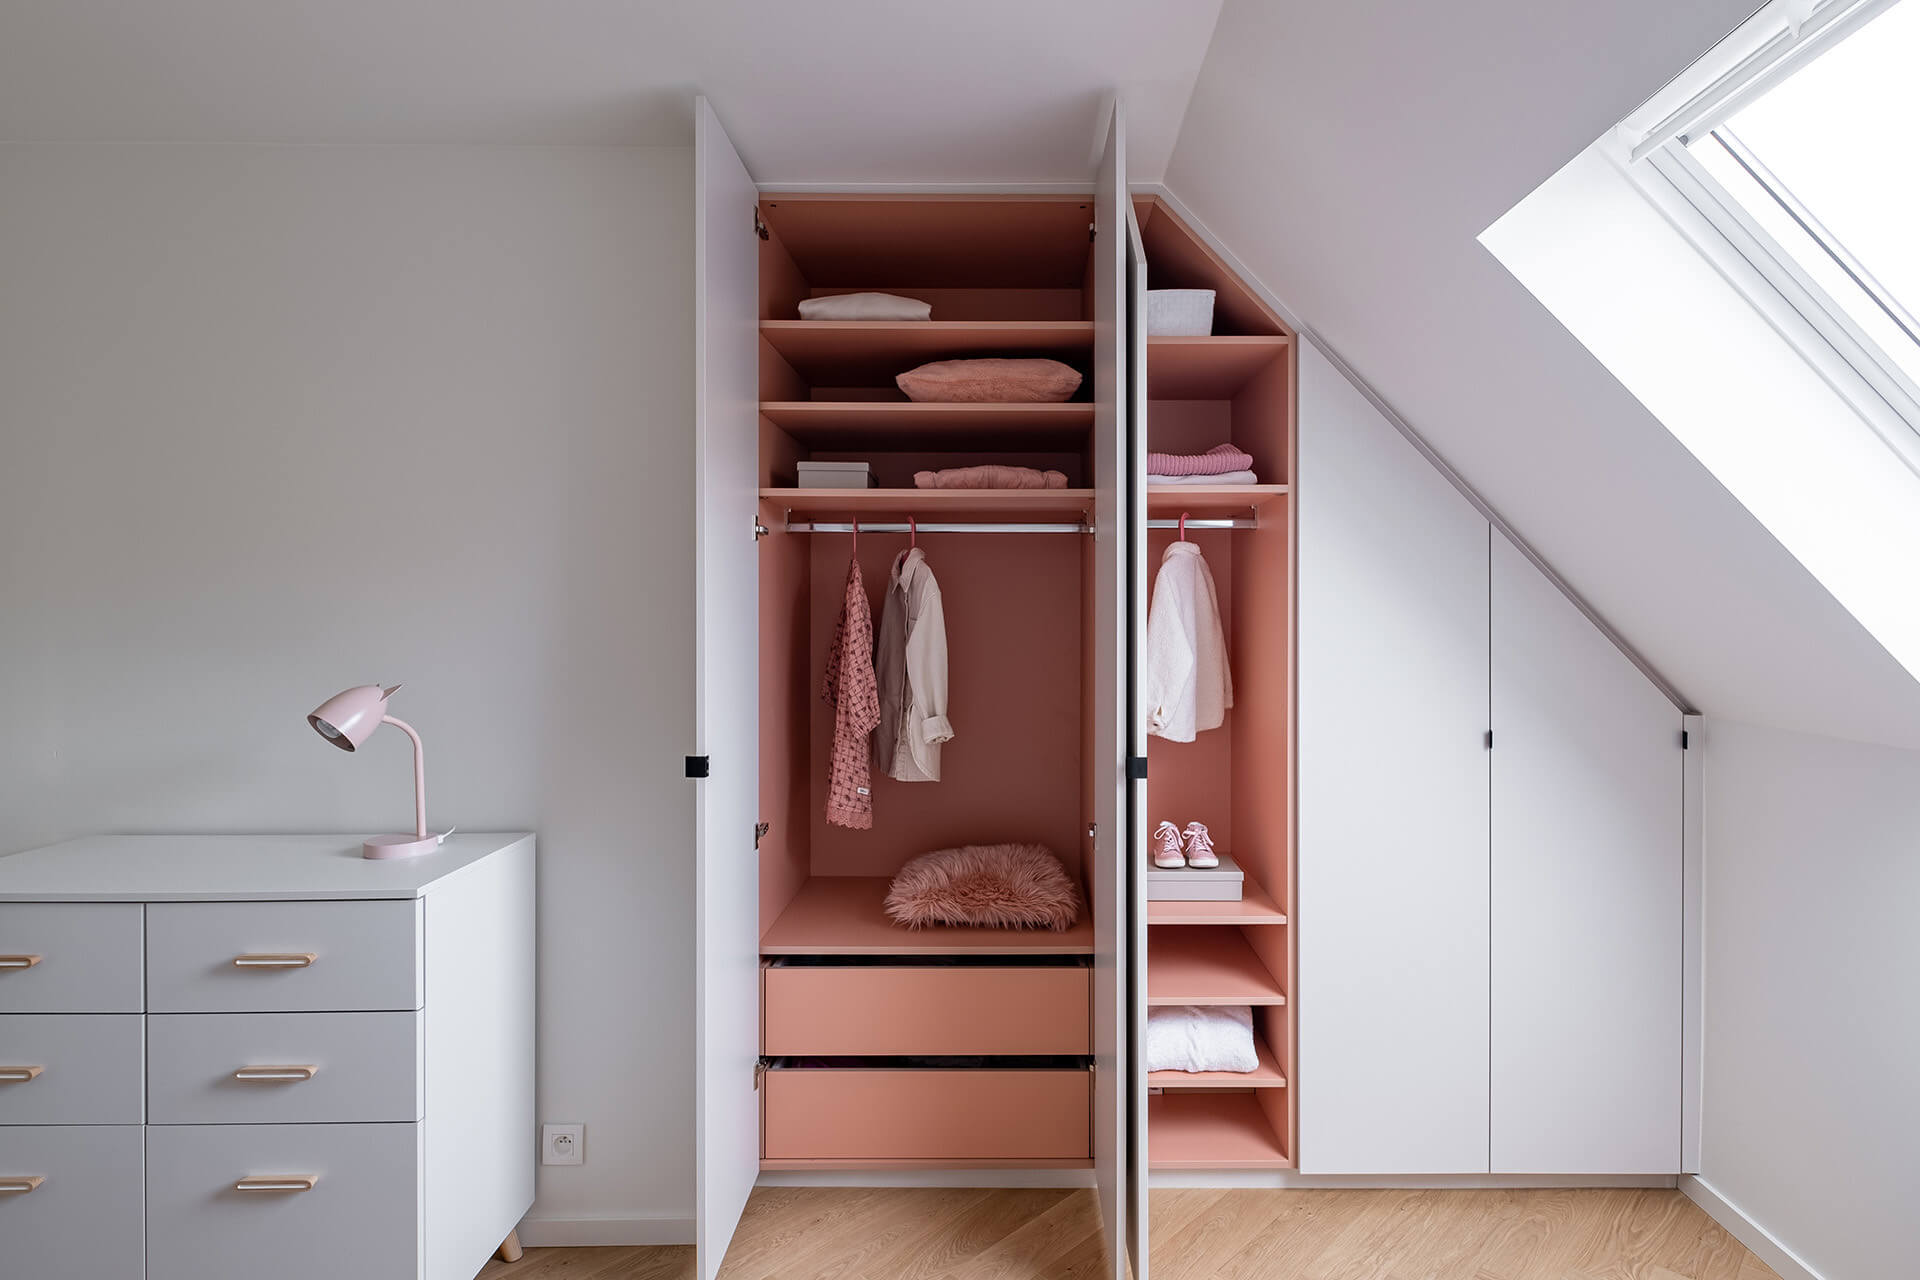 integrated closet under a sloping roof with a pink touch by maatkastenonline